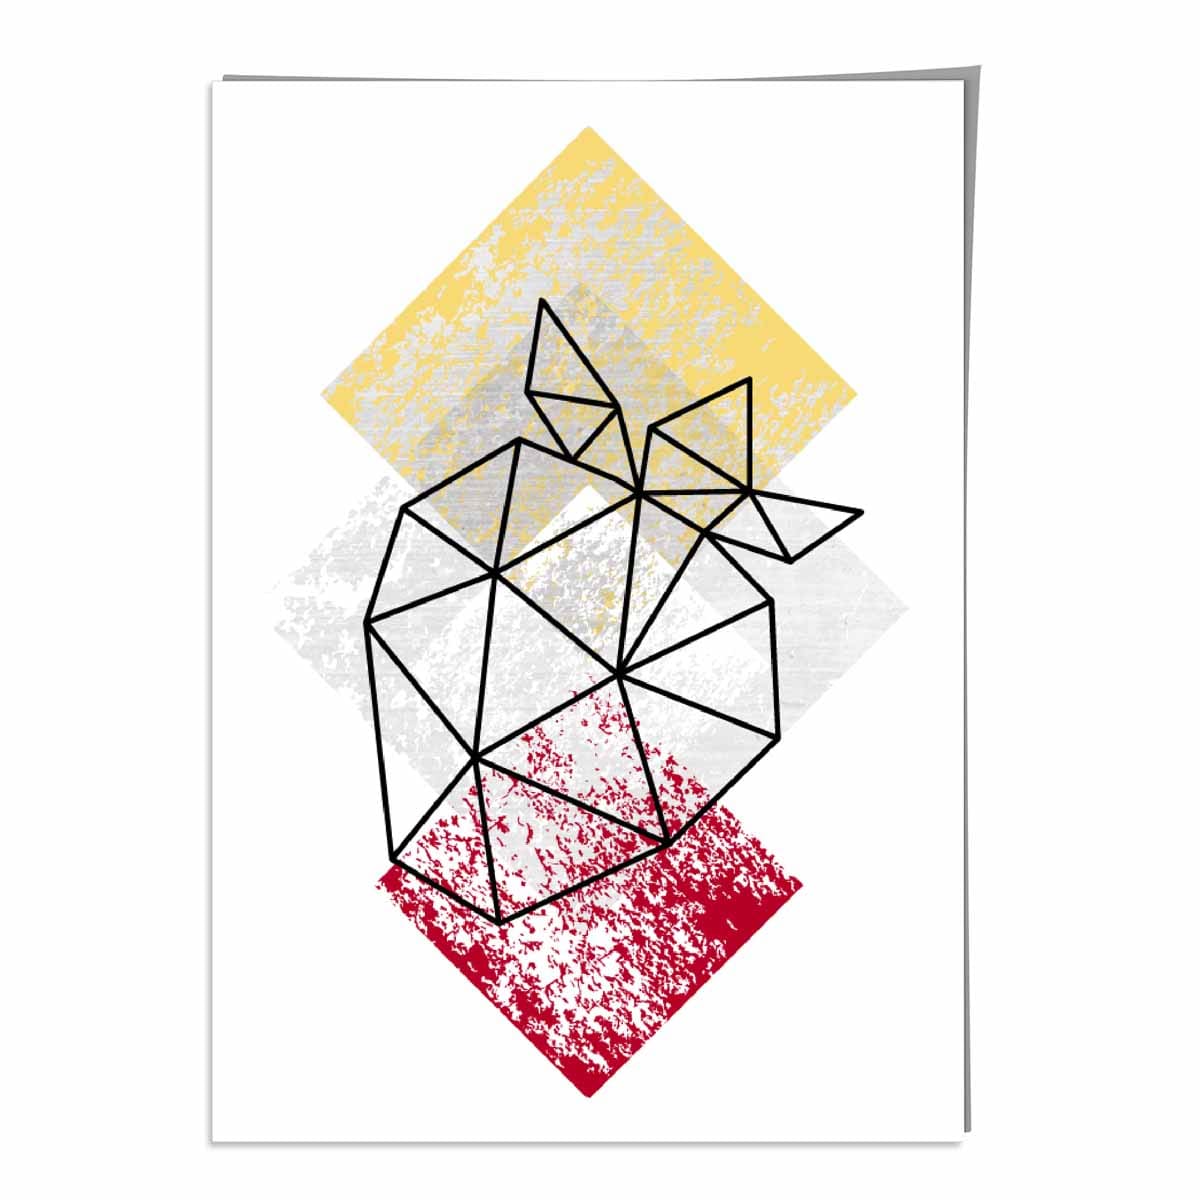 Geometric Fruit Line art Poster of Strawberry Textured Yellow Grey Red